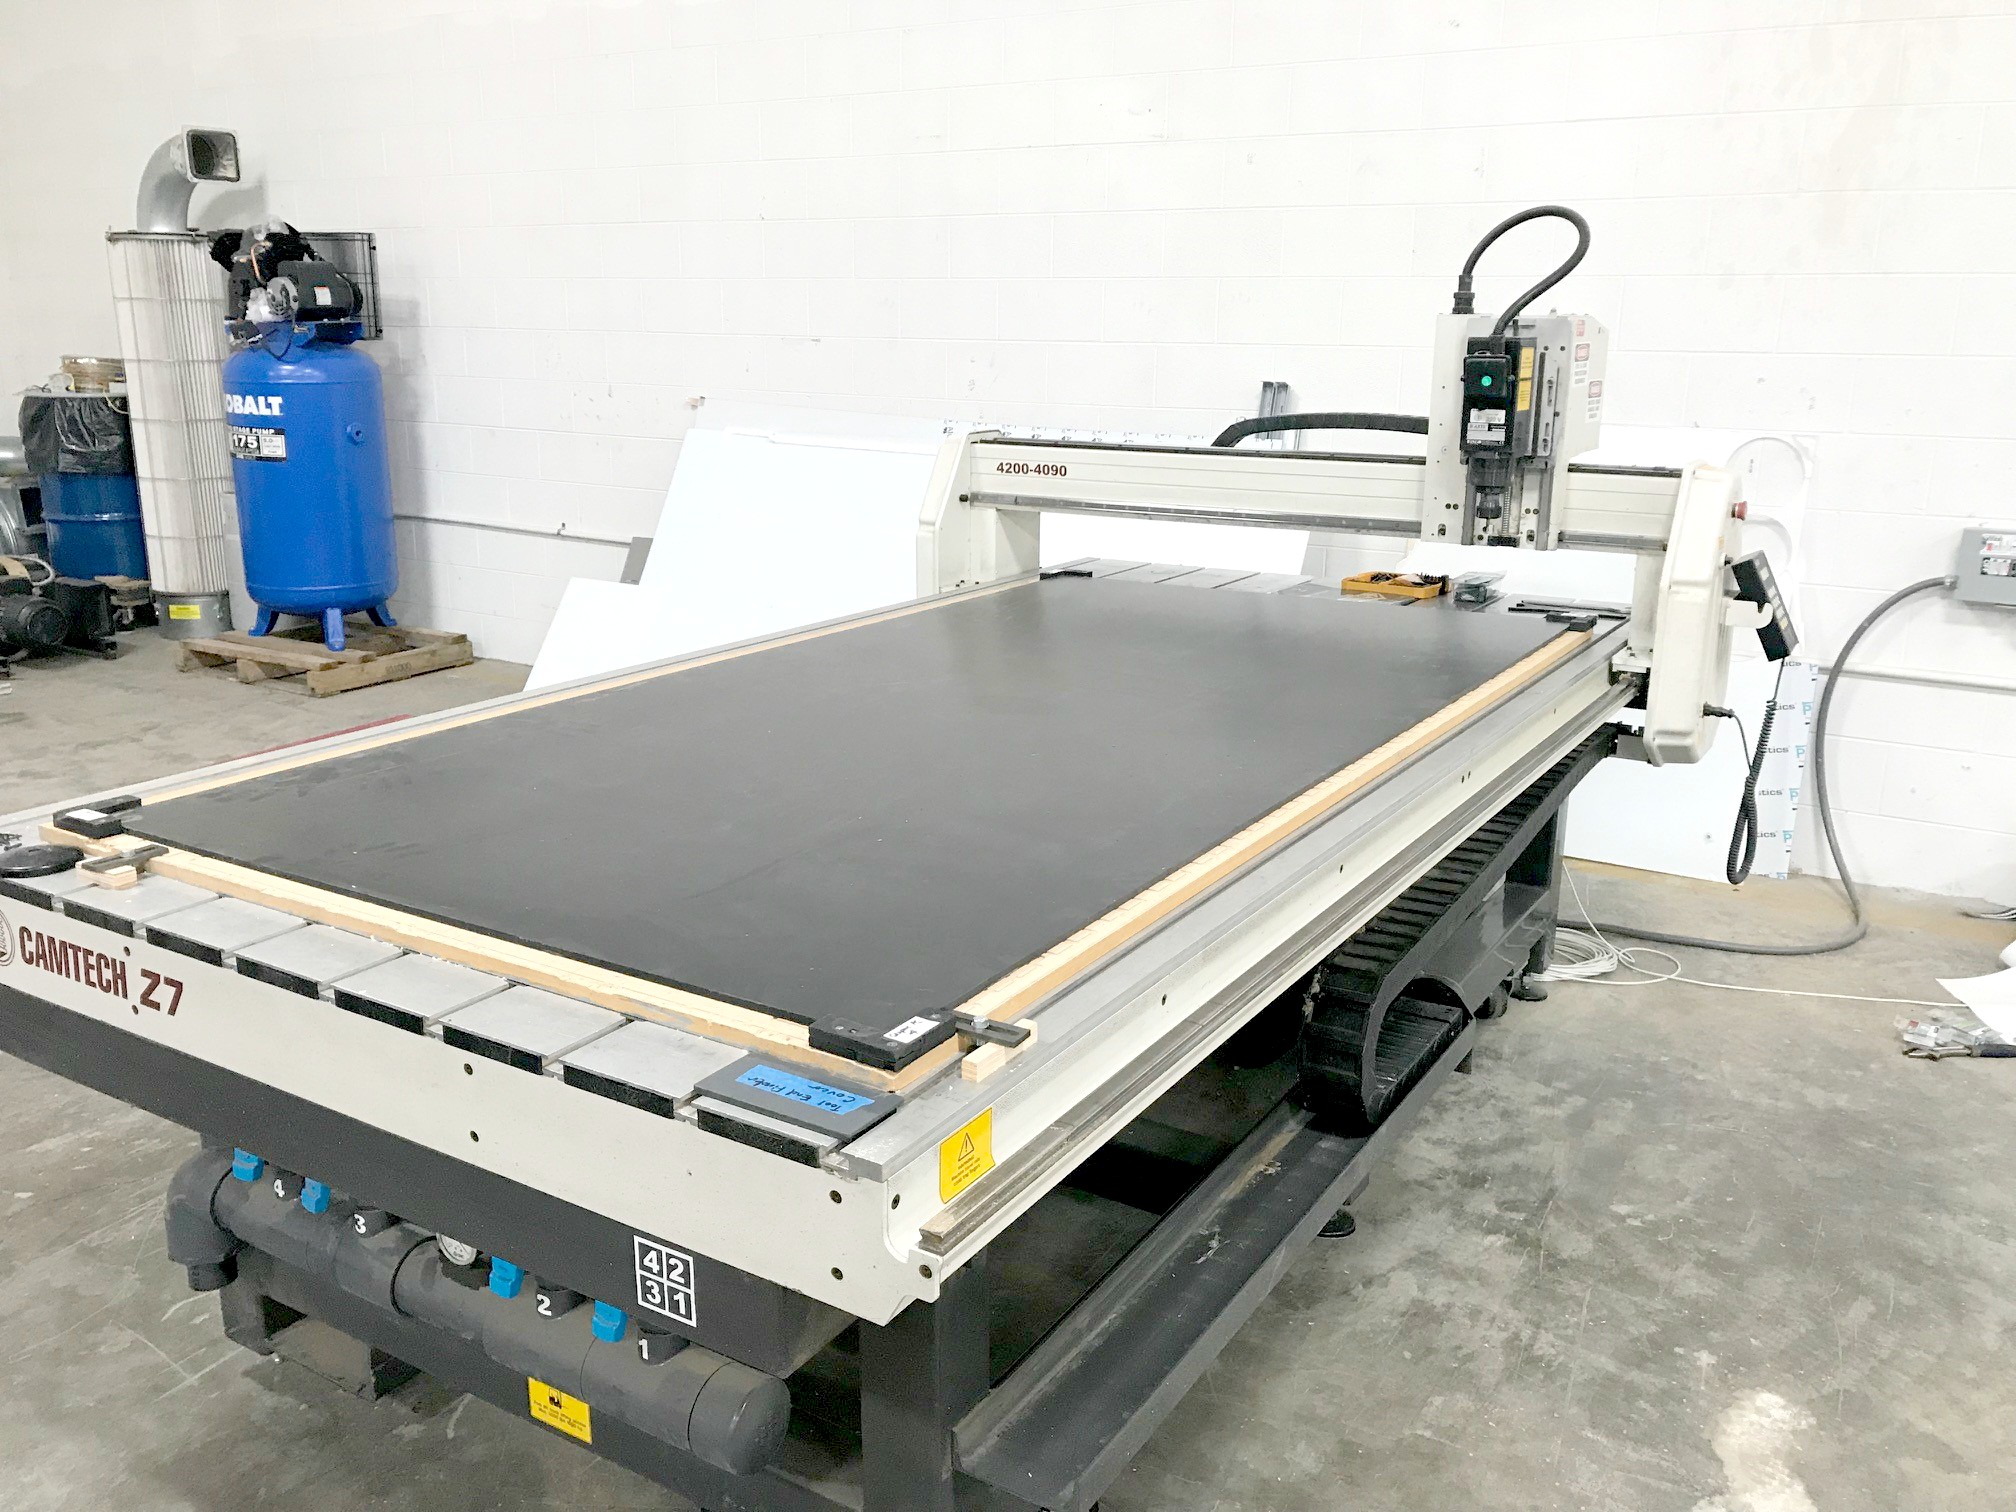 AXYZ Z7 Camtech 4? x 8? CNC Router (Used) Item # UR-23 (Tennessee)